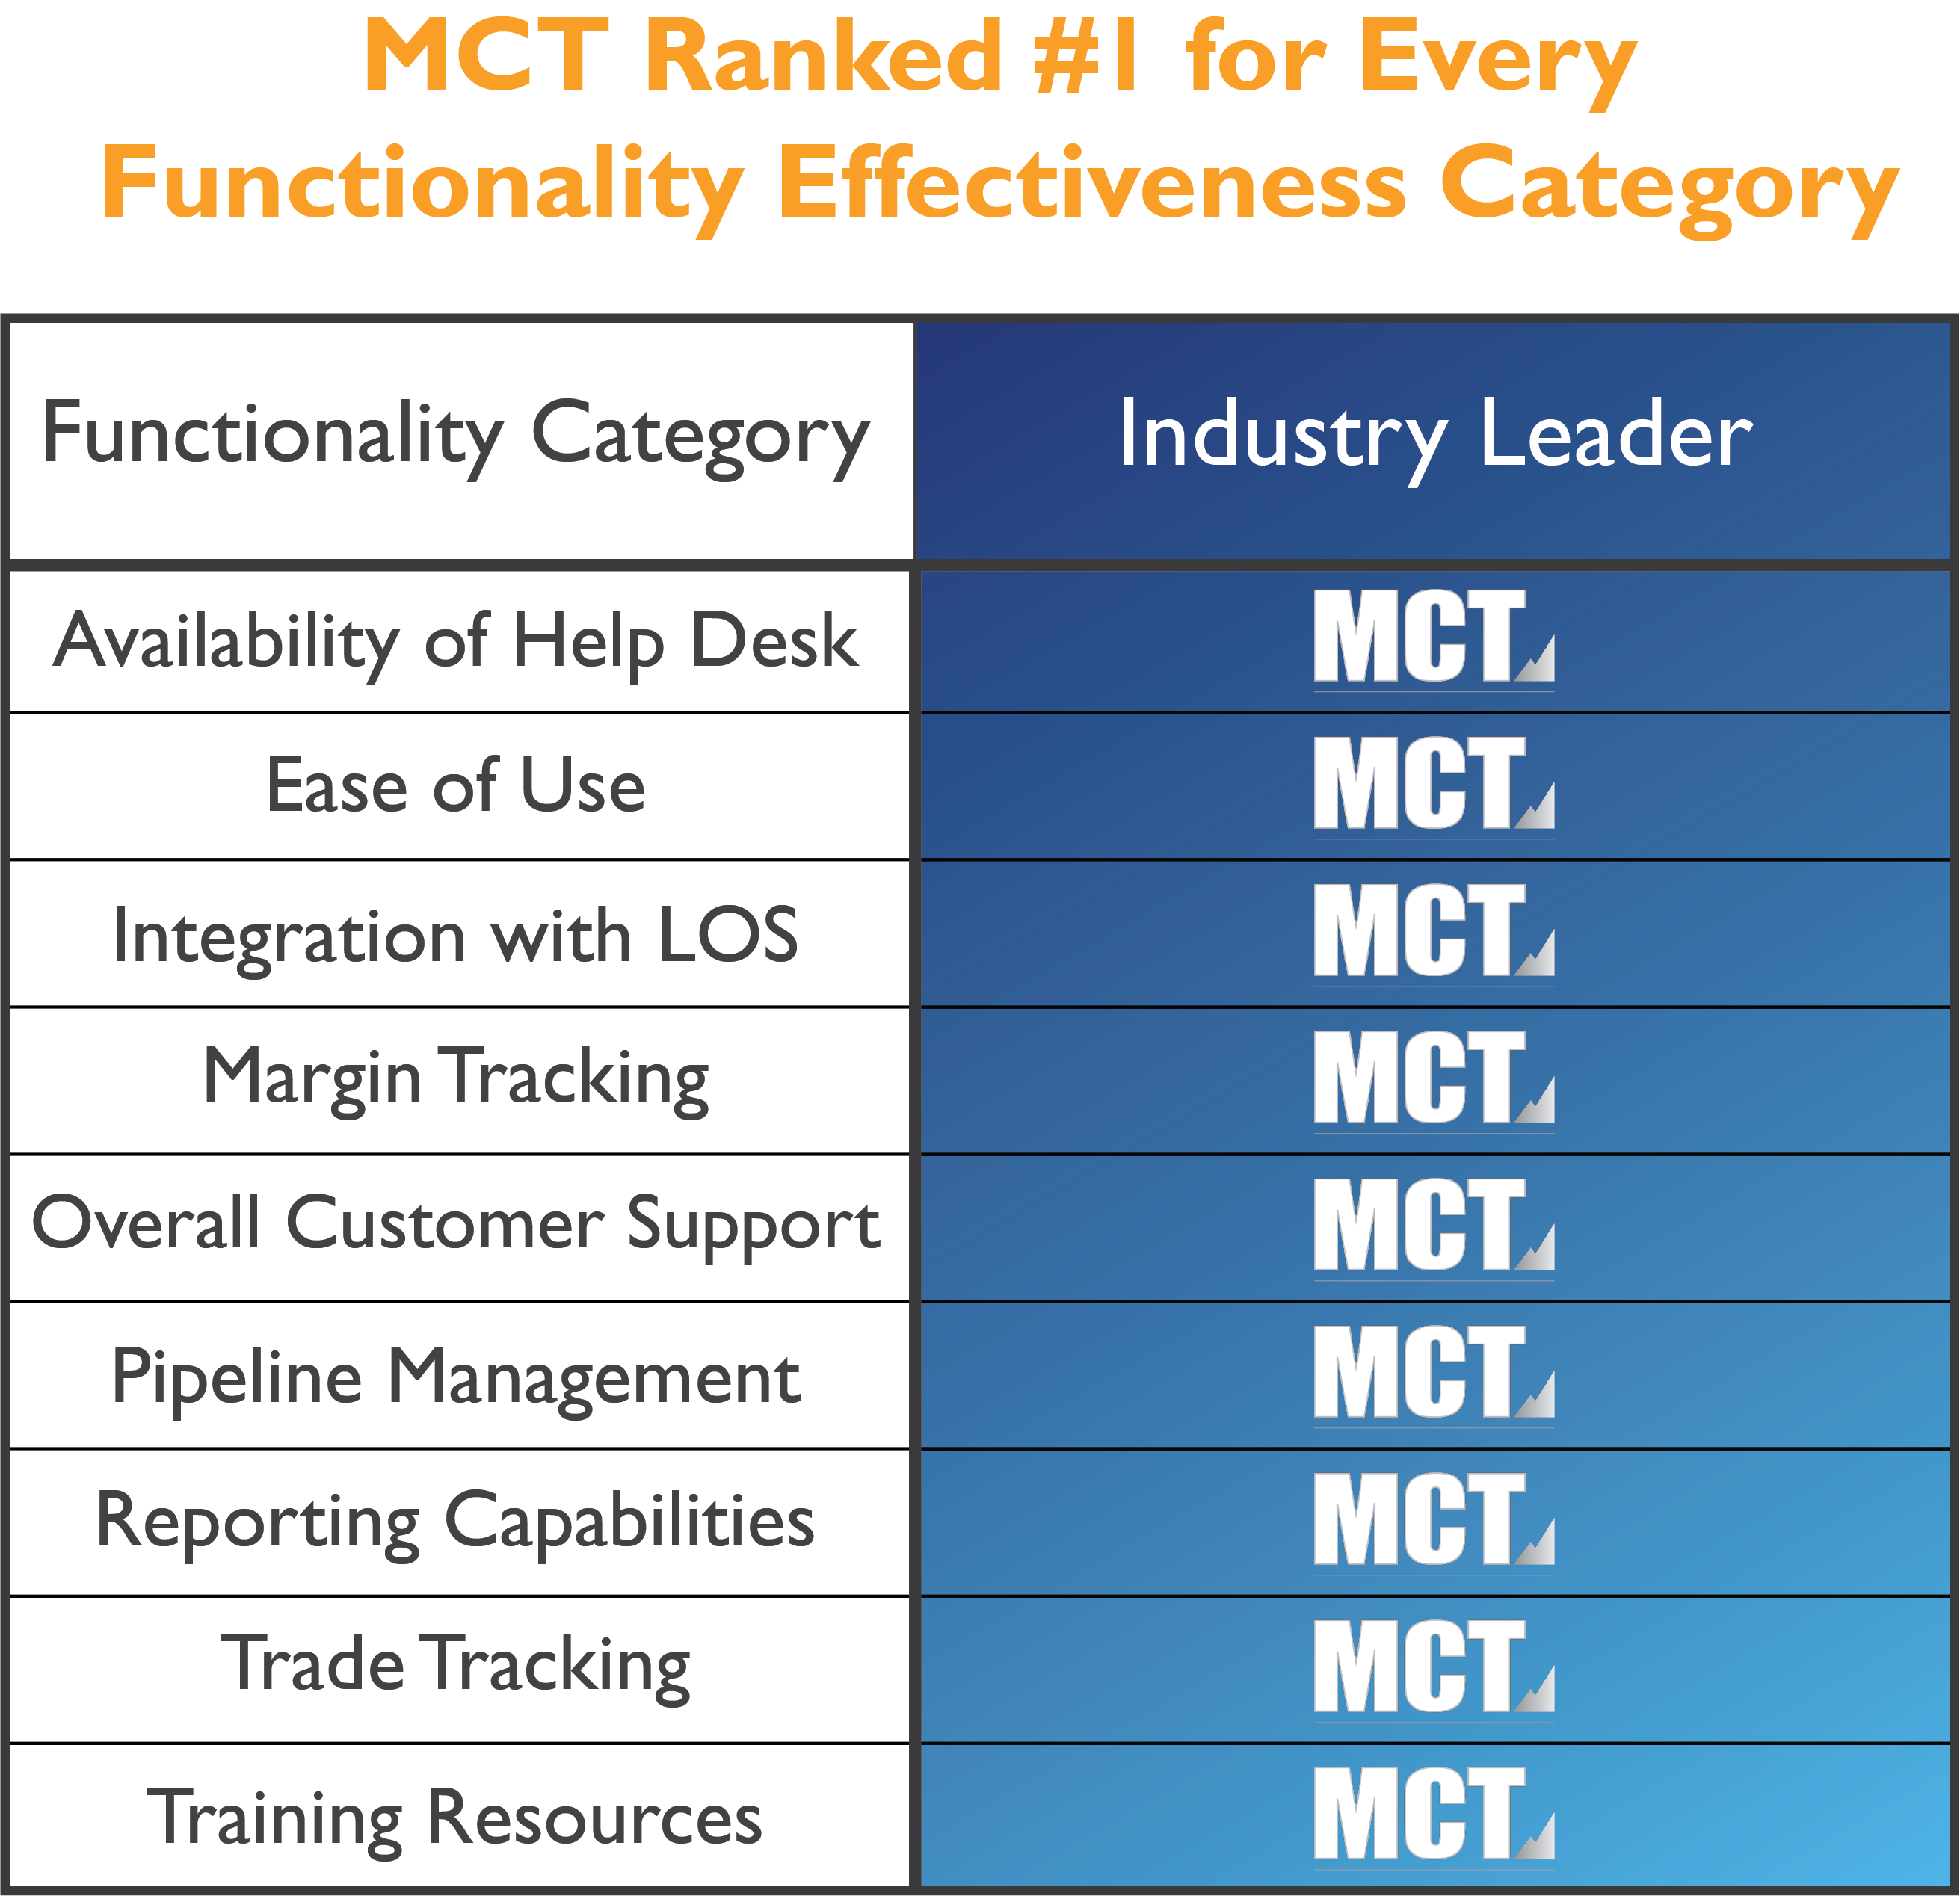 MCT Scores High Marks in Overall Satisfaction, Lender Loyalty, and Functionality Effectiveness According to Recent Study